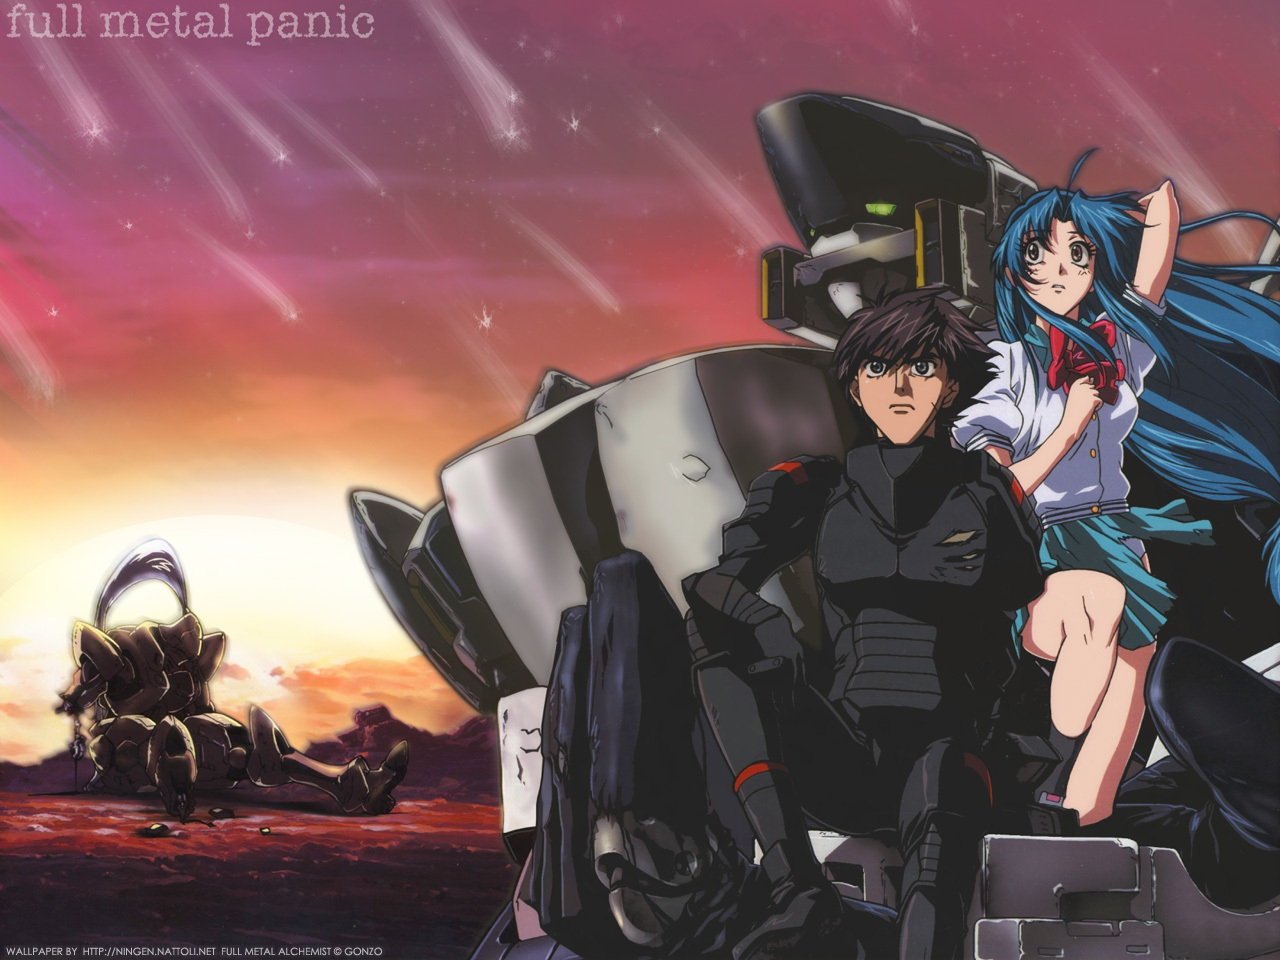 Full Metal Panic Anime - The Seven Deadly Sins Store